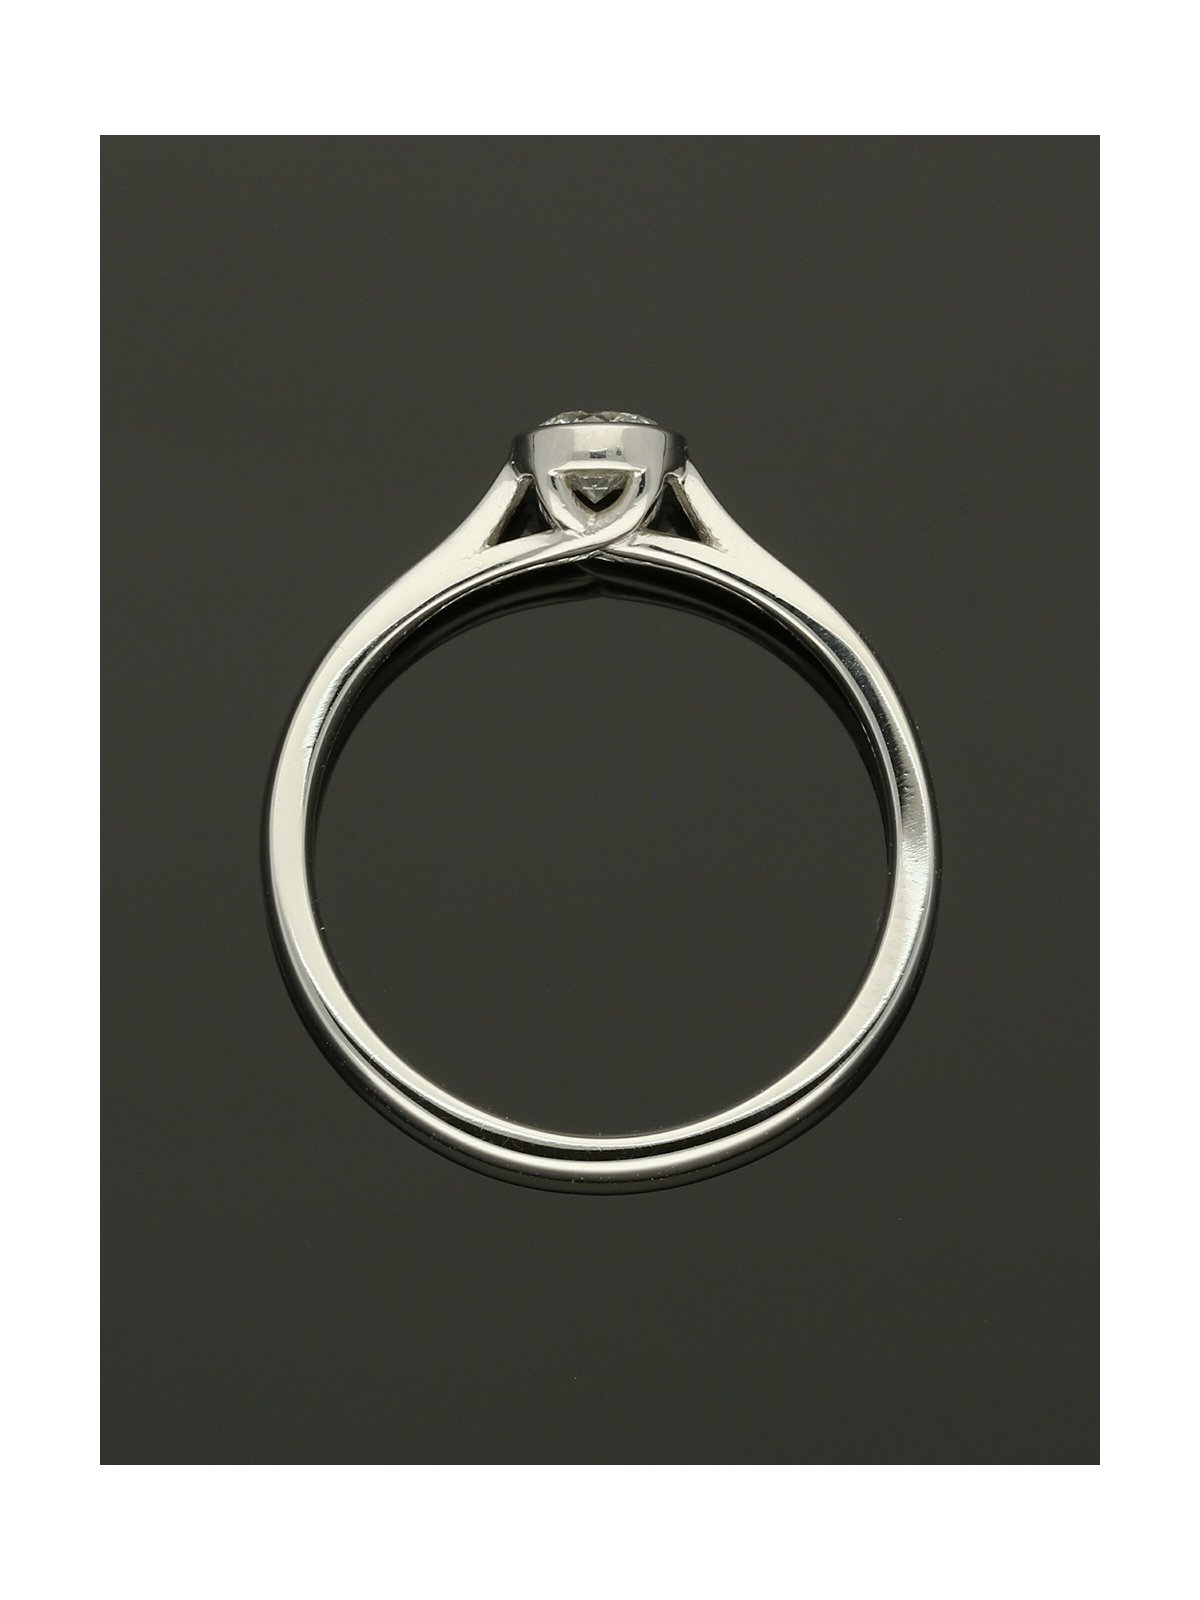 Diamond Solitaire Engagement Ring "The Diana Collection" 0.25ct Round Brilliant Cut in Platinum